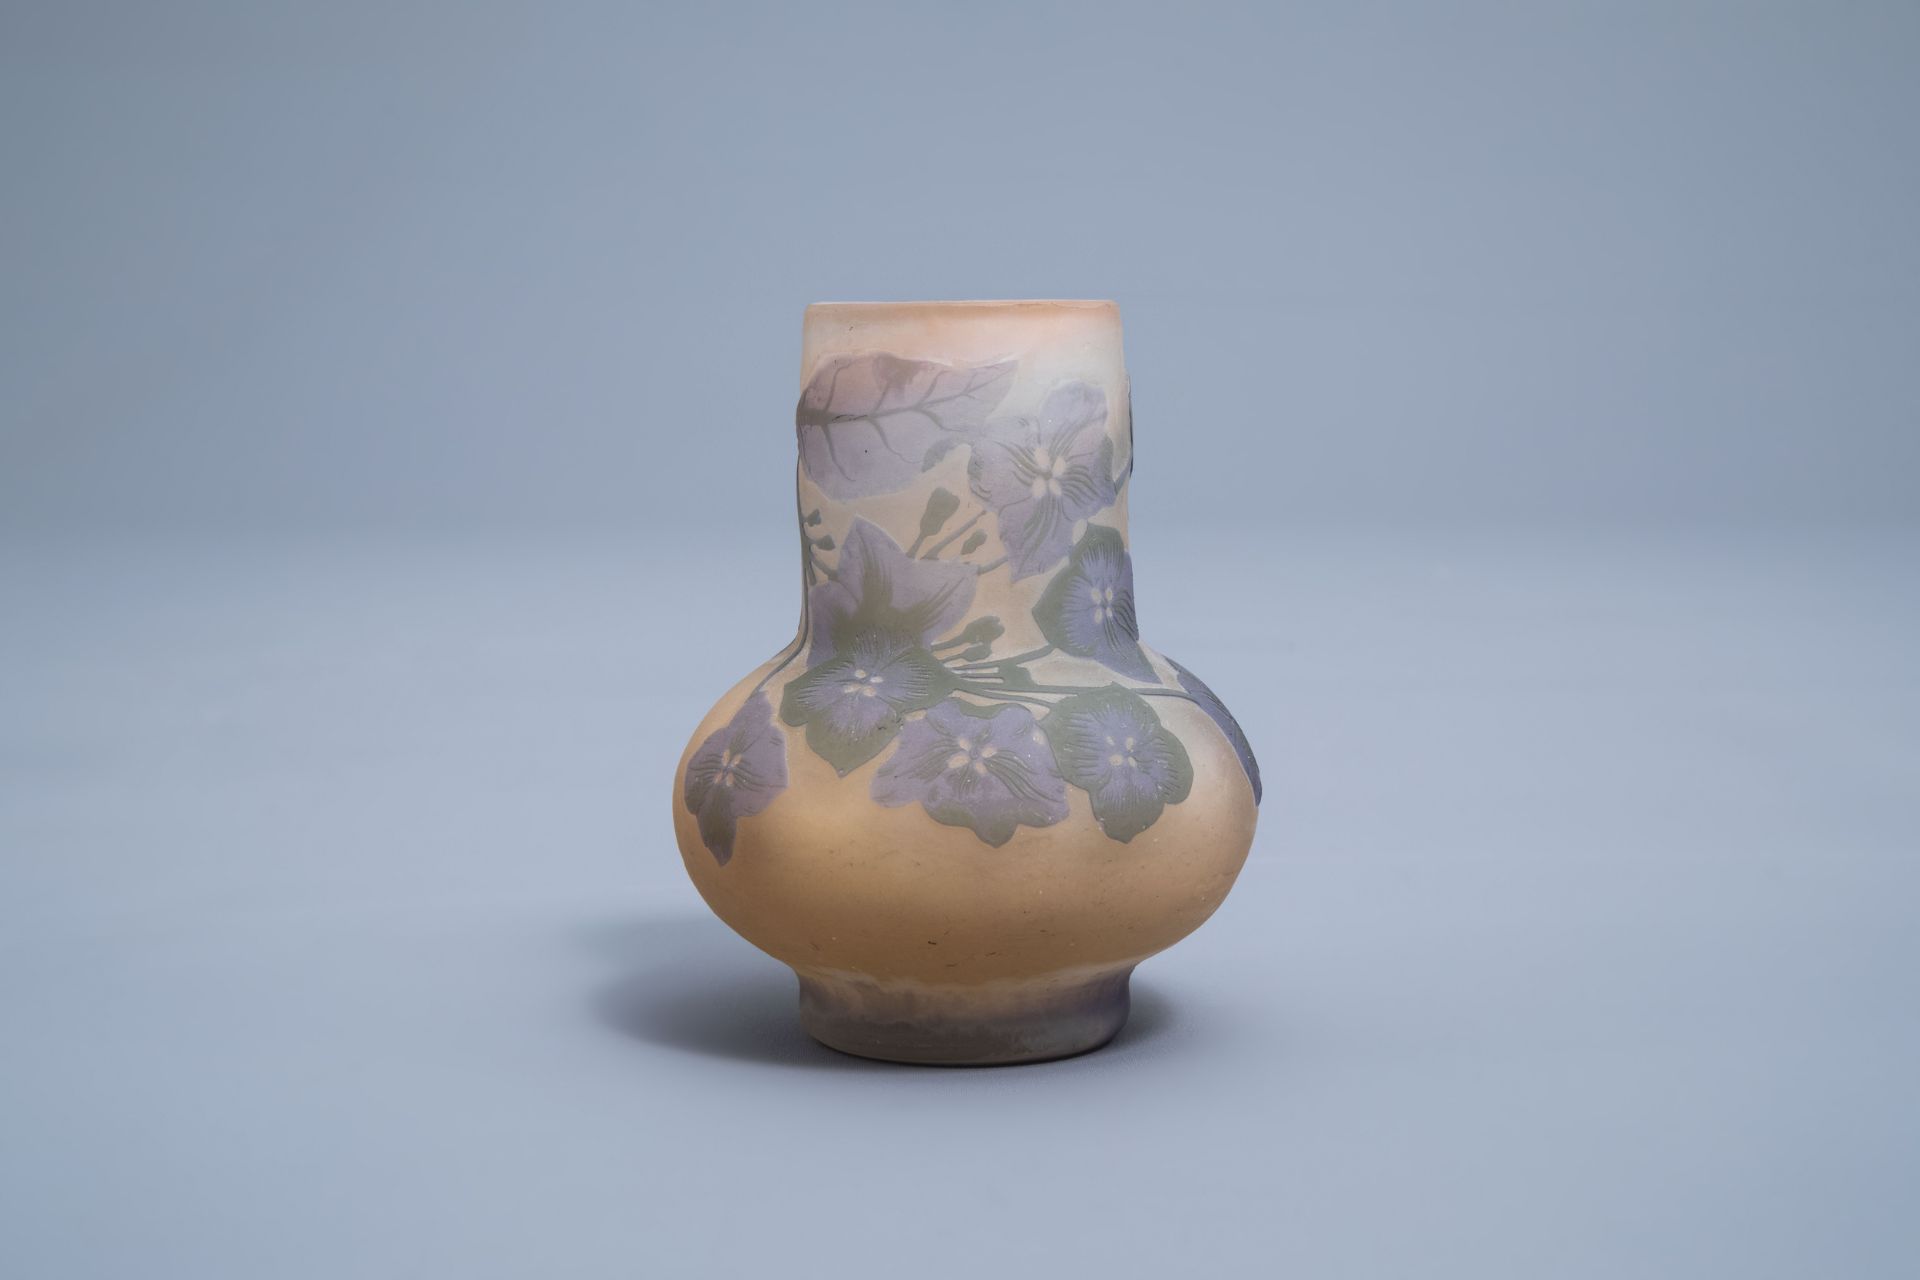 Emile GallŽ (1846-1904): Two cameo glass Art Nouveau vases with floral design, 20th C. - Image 9 of 15